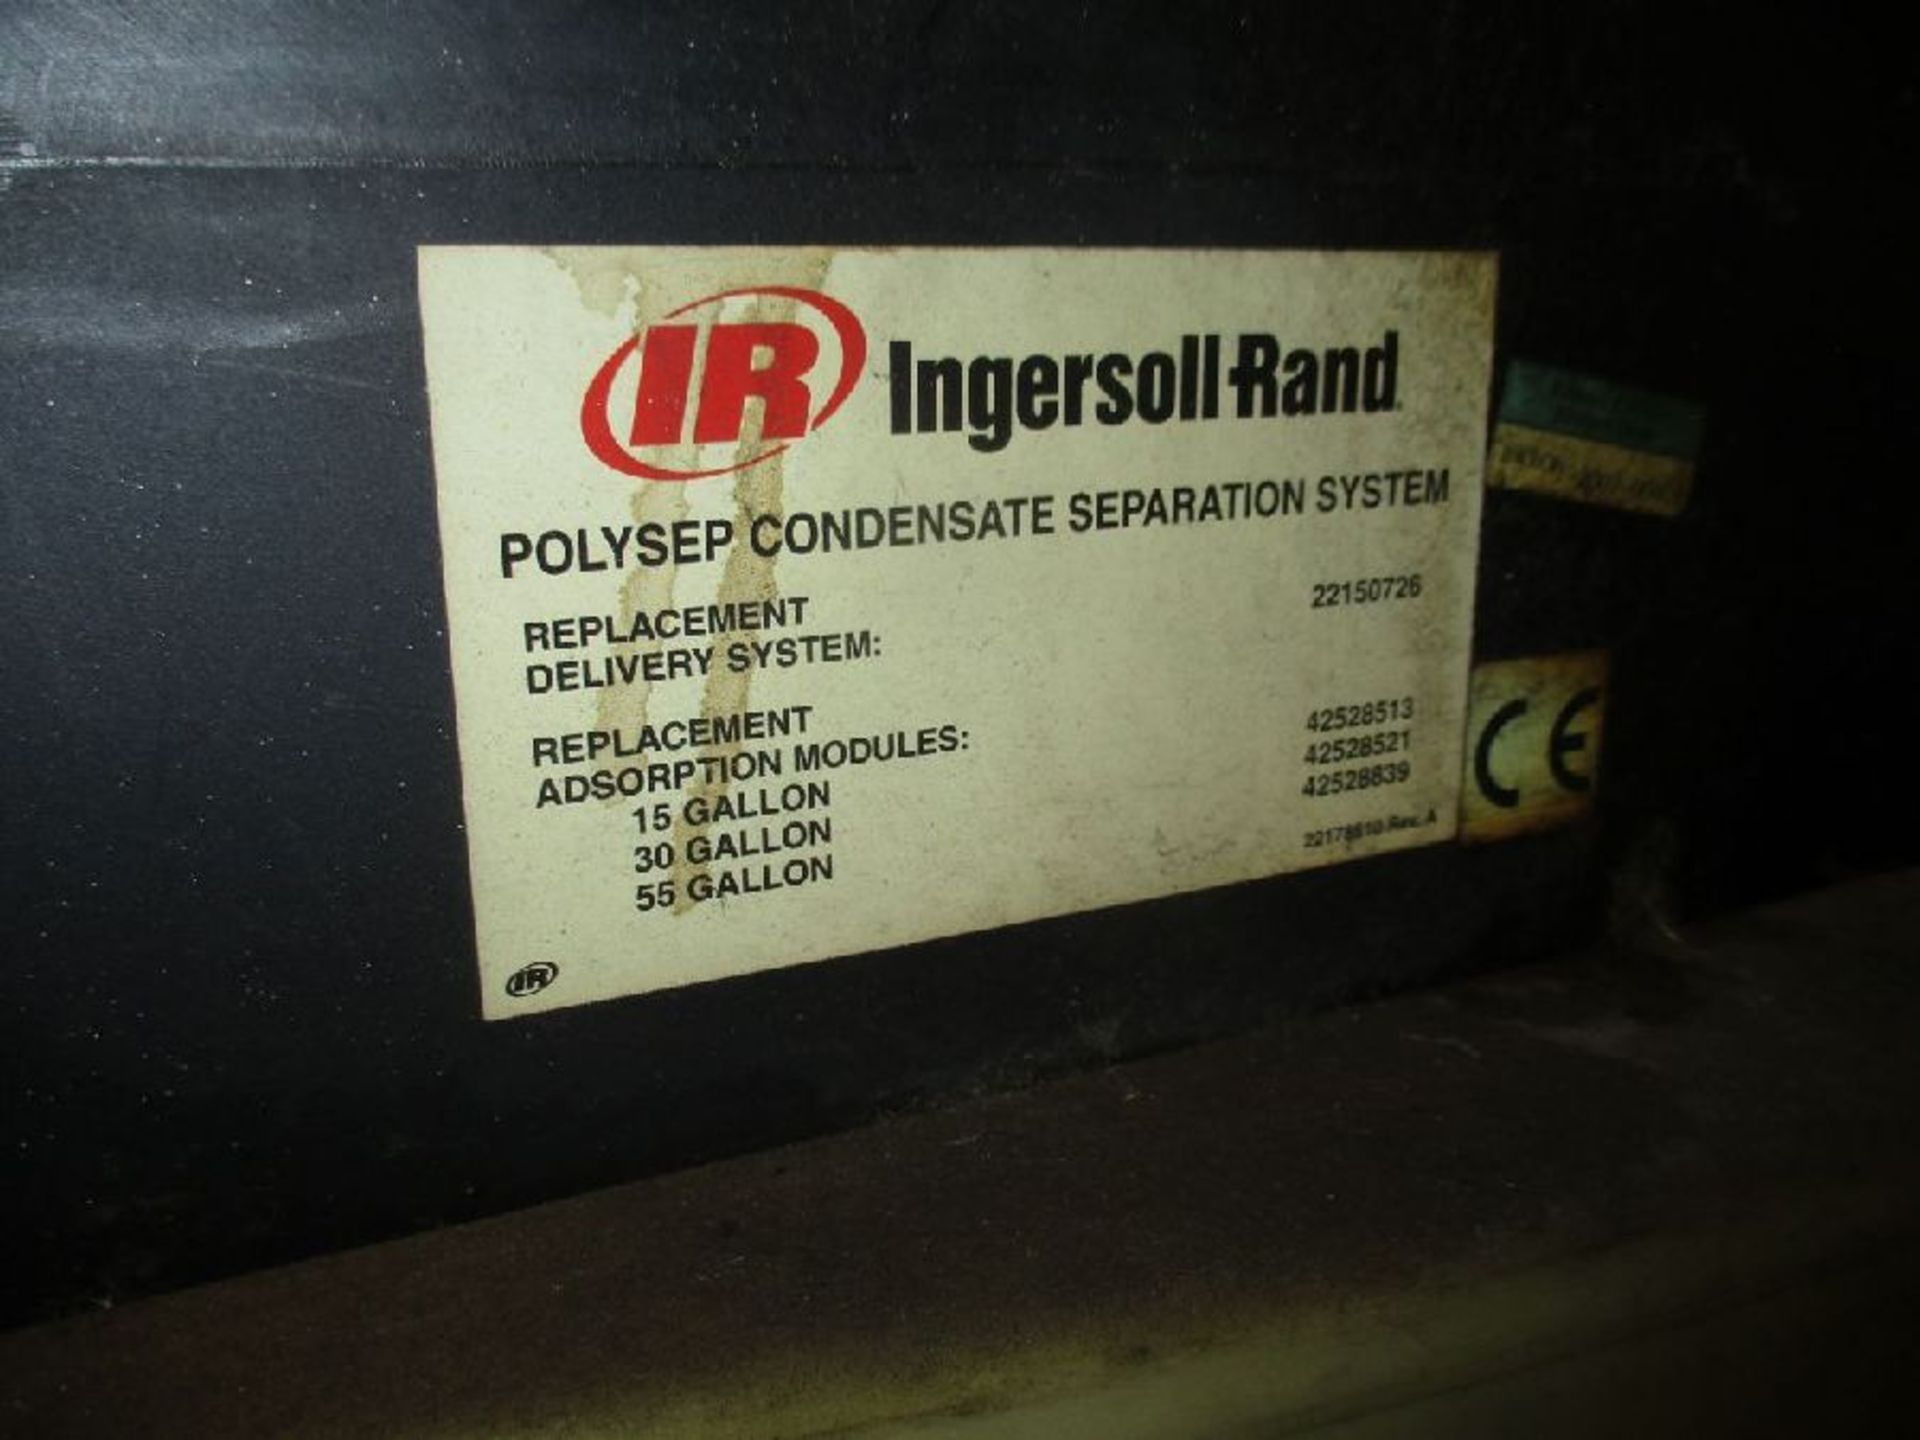 Ingersoll Rand Polysep Condensate Oil Separator - Image 2 of 3